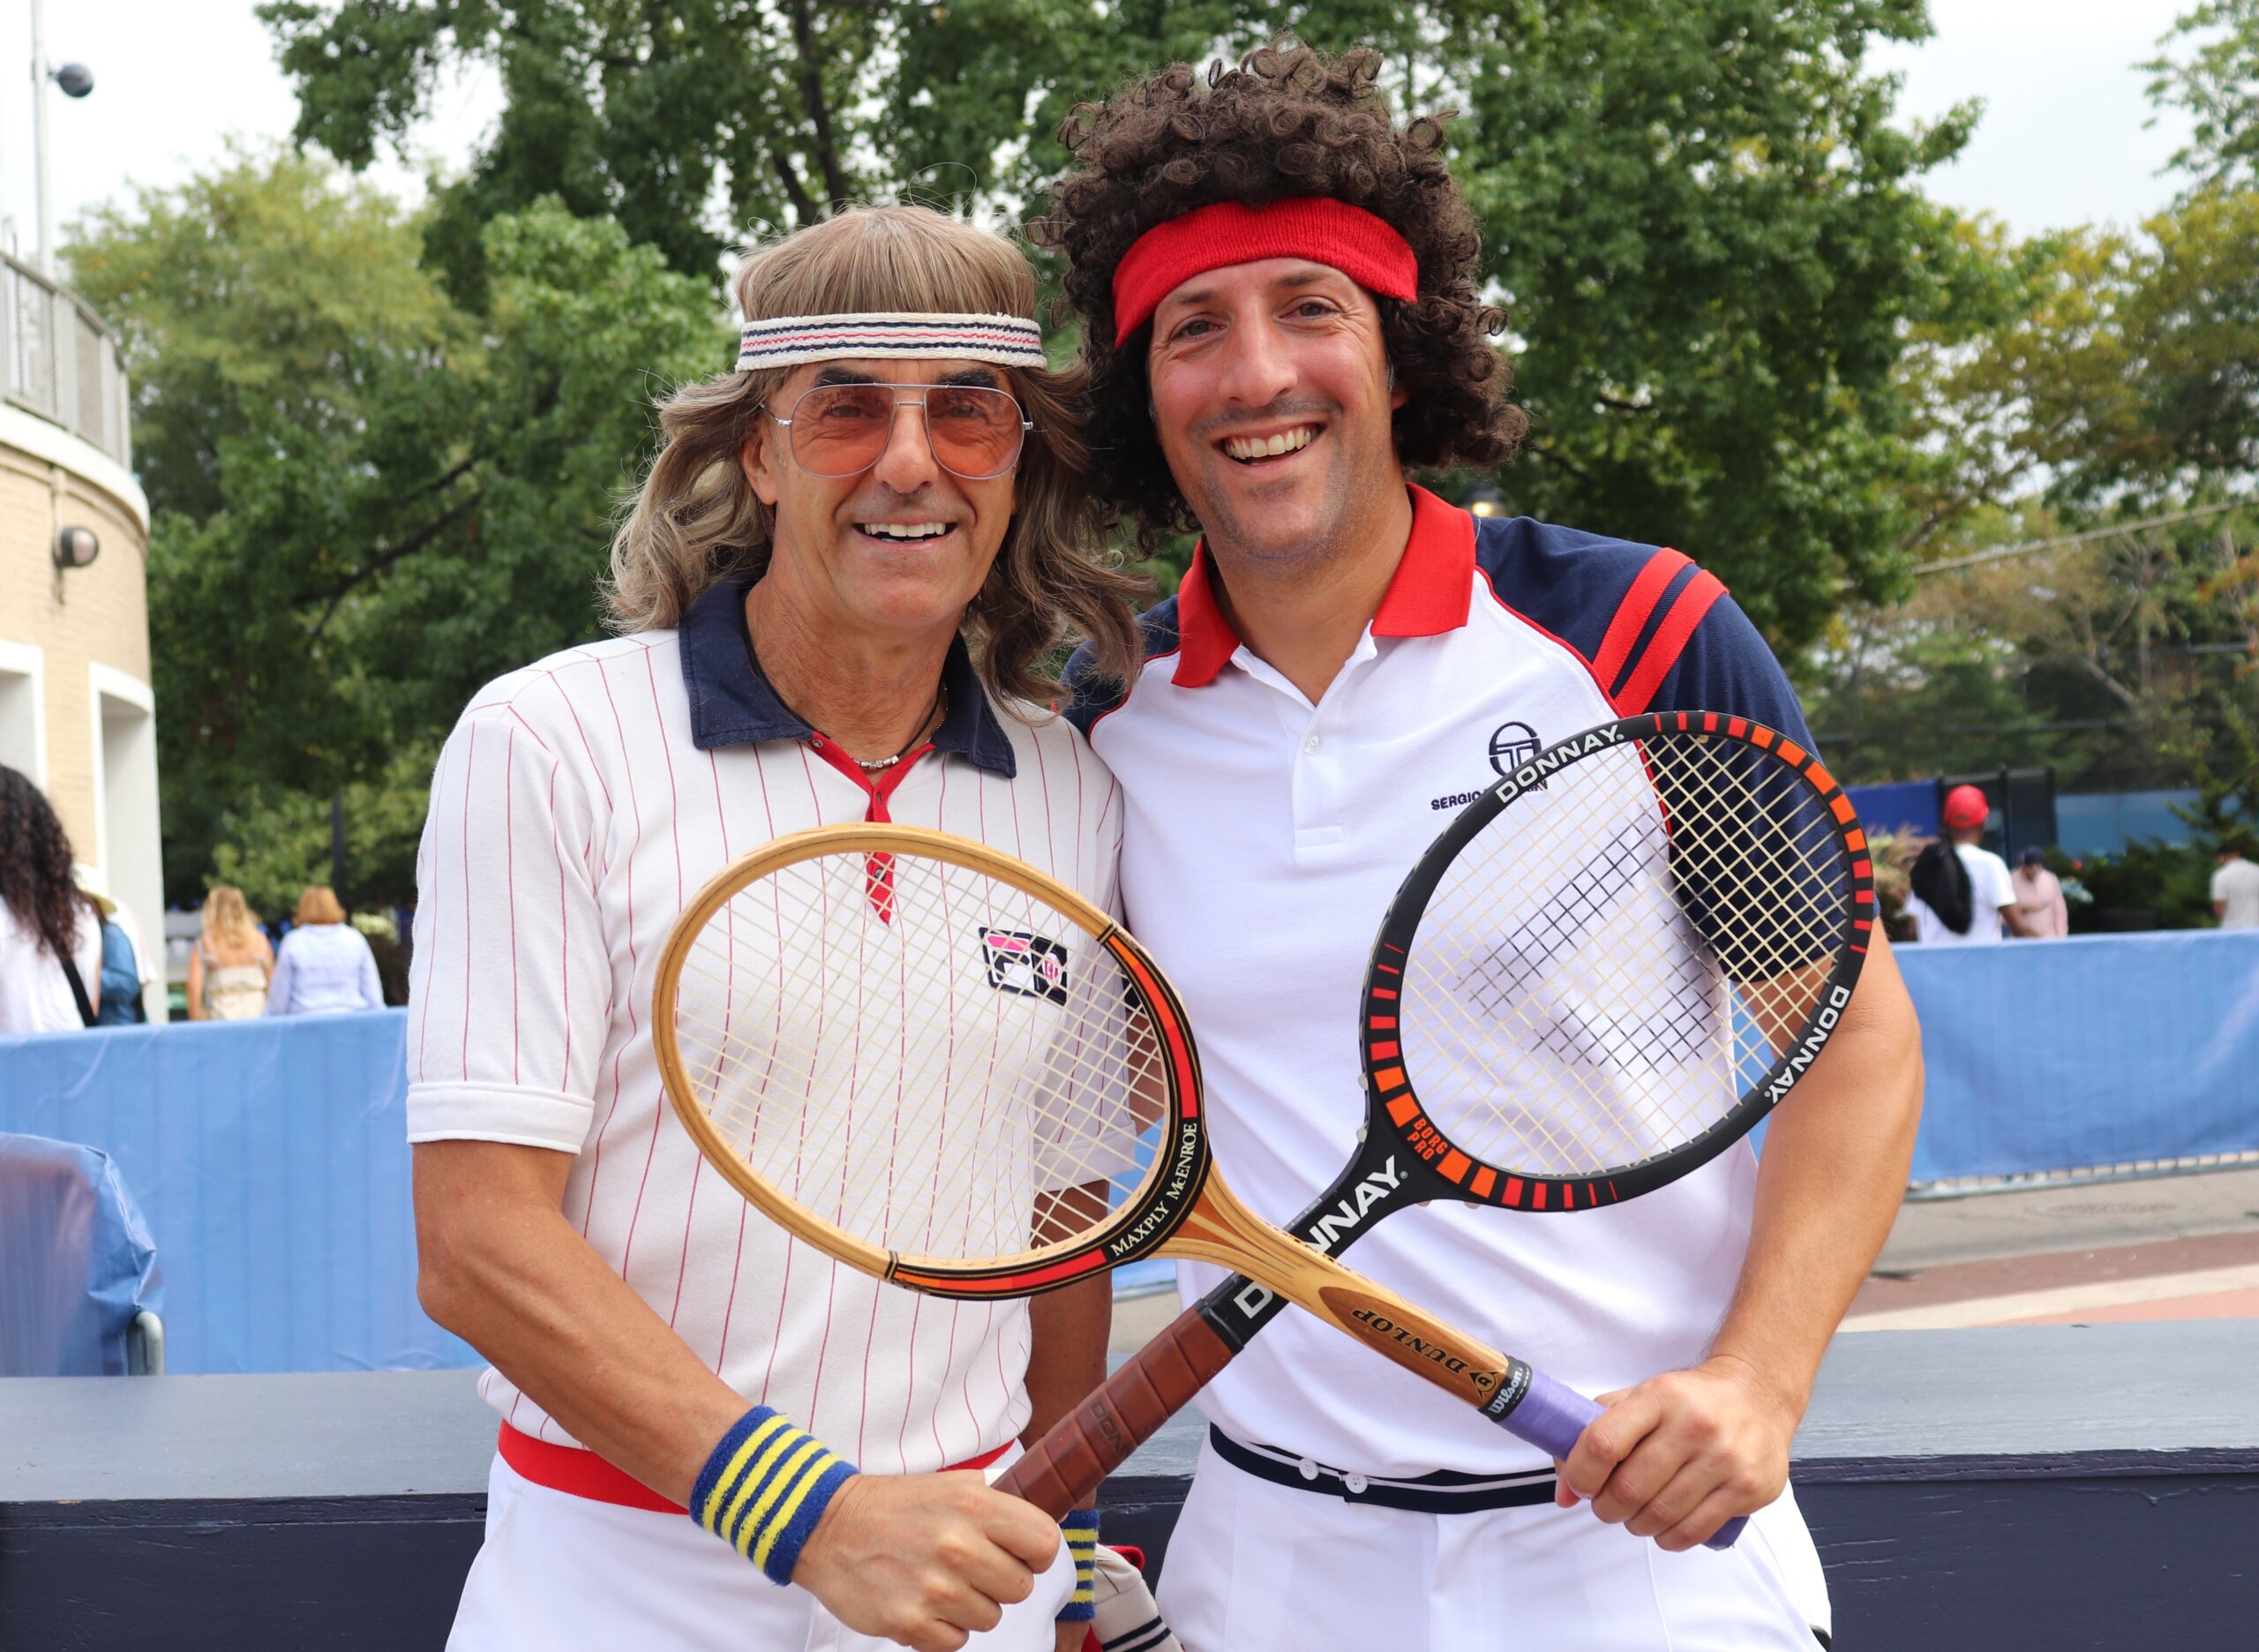 Italian attendees known as "BorgMcEnroe" at the US Open. The duo are dressed as former tennis rivals Björn Borg and John McEnroe (Photo: Michael Dorgan, Queens Post)